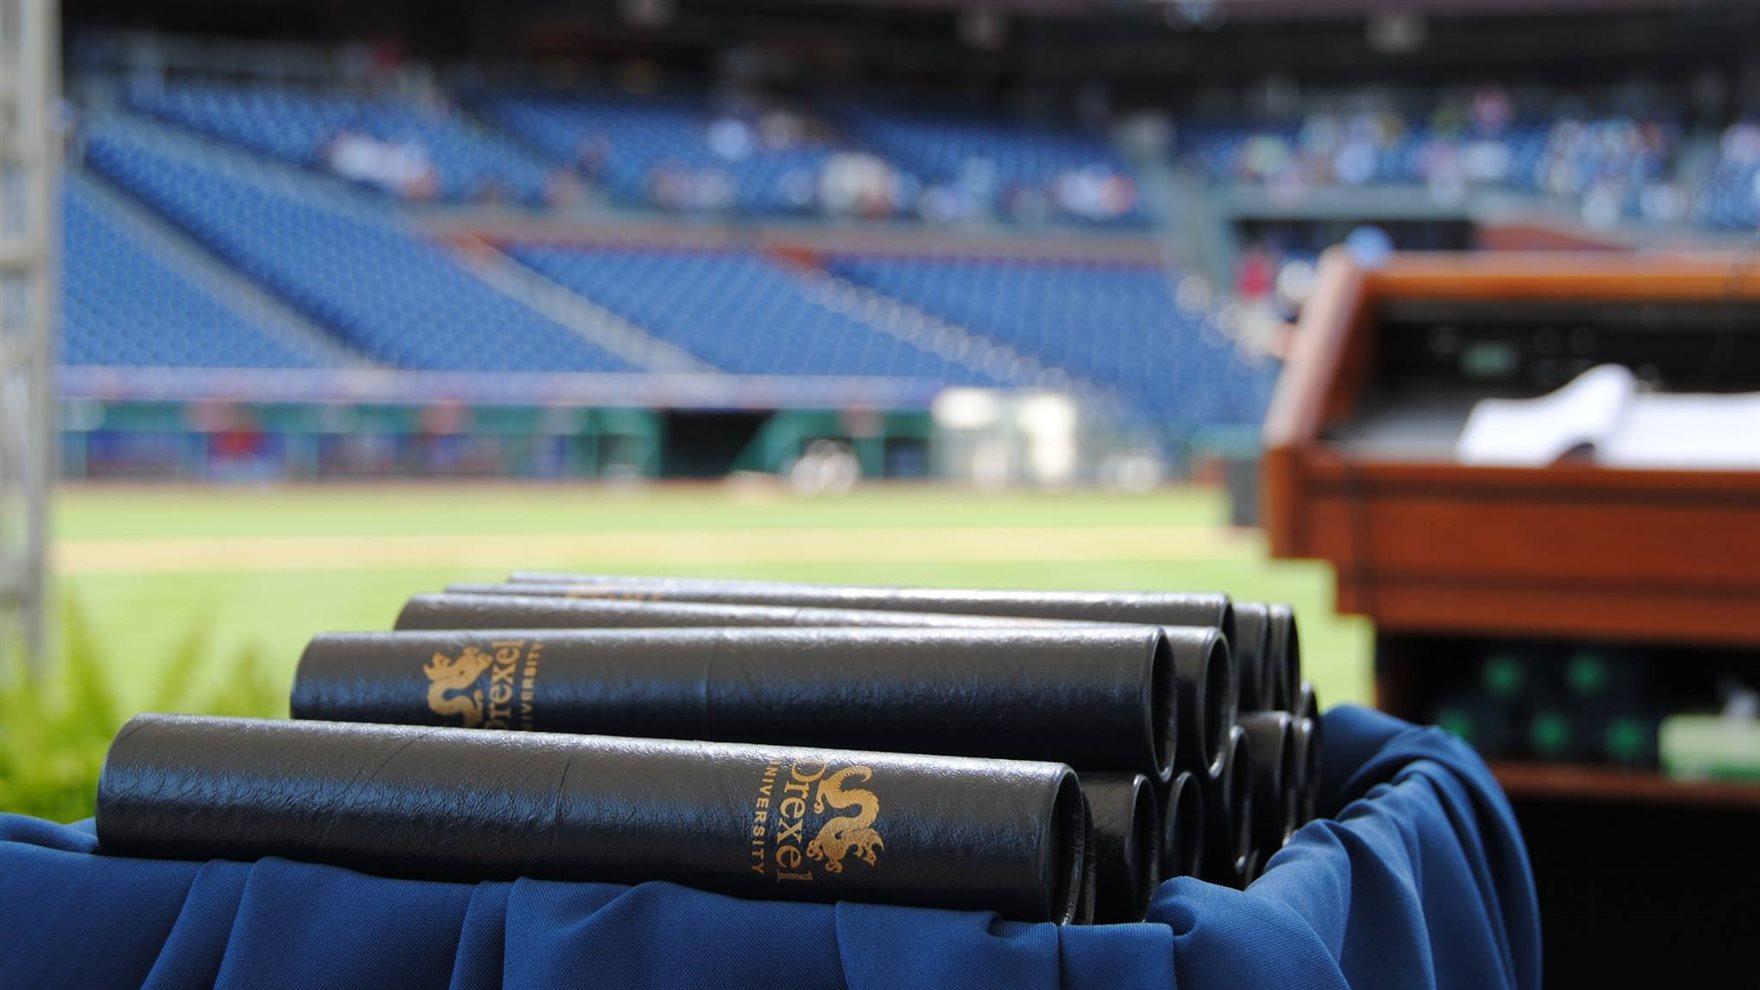 Diplomas stacked in front of the podium at Citizens Bank Park.